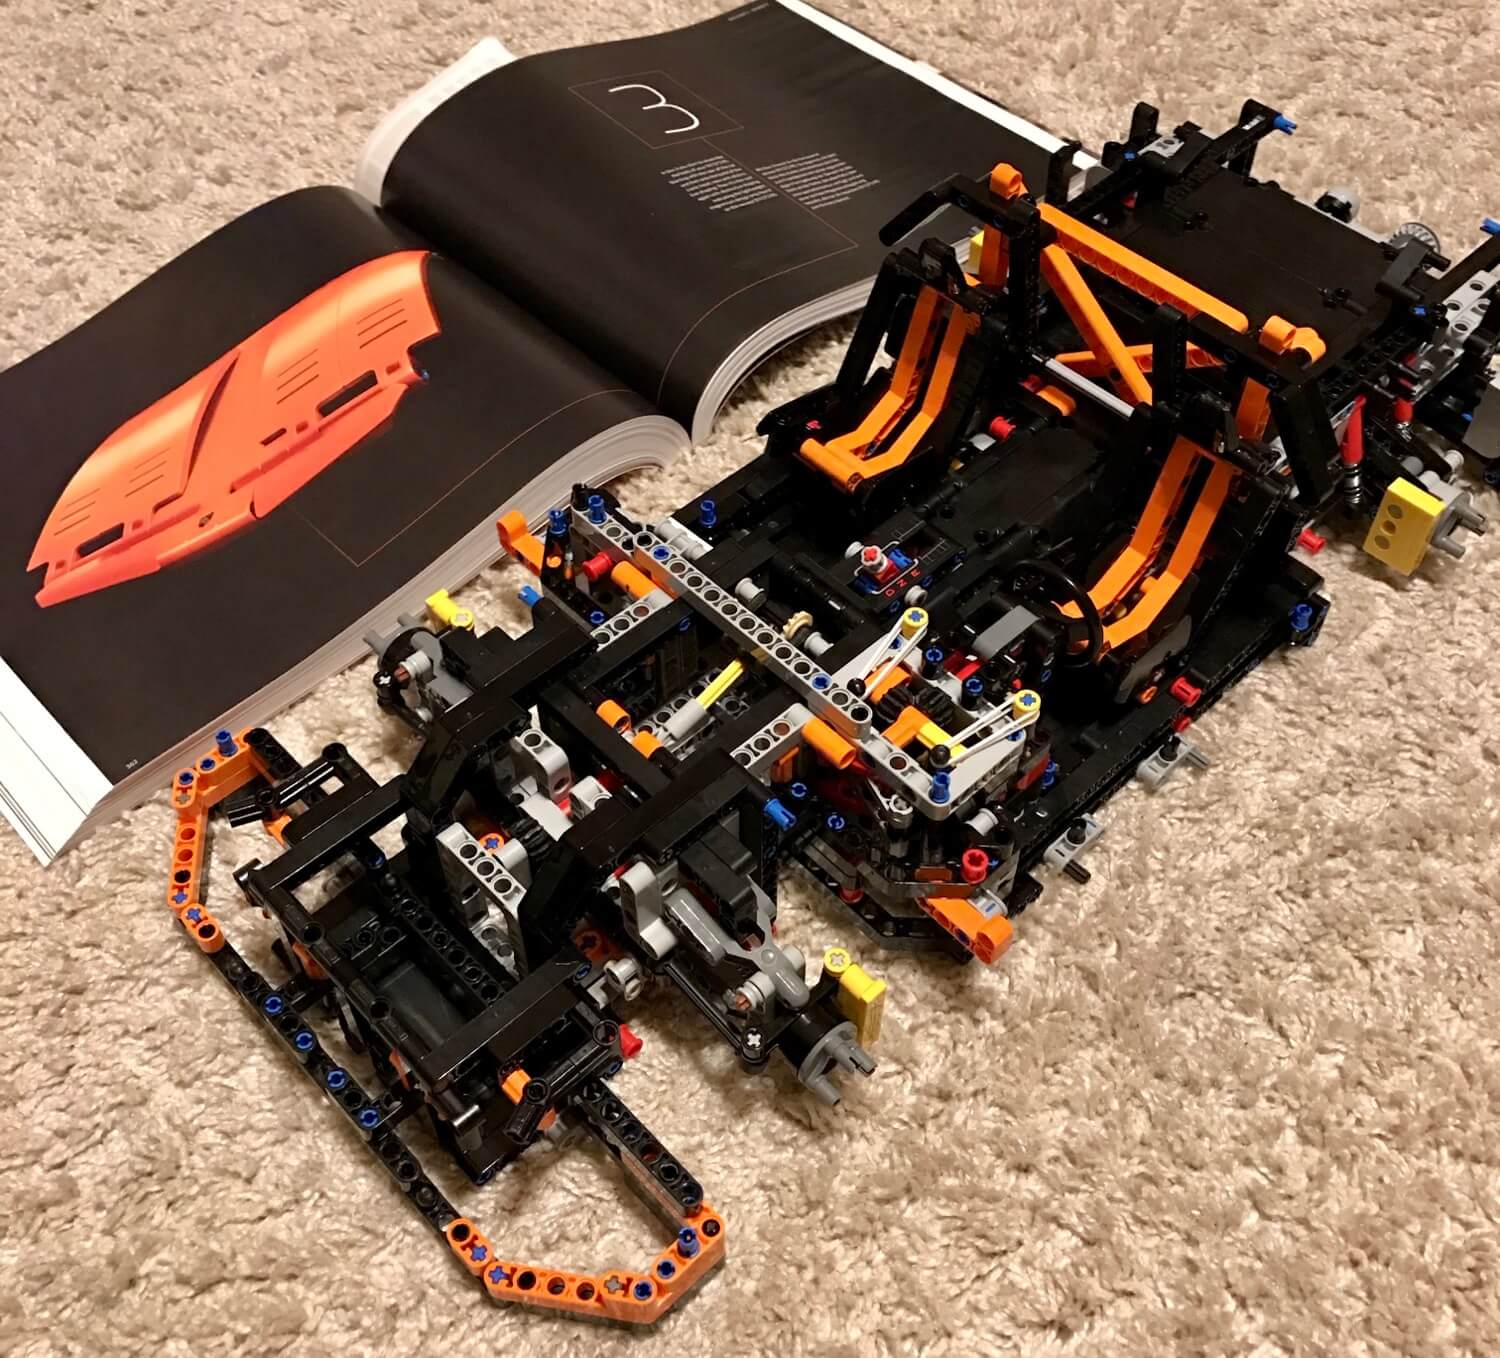 Porsche 911 GT3 RS - why building Lego sets is so much fun! 4